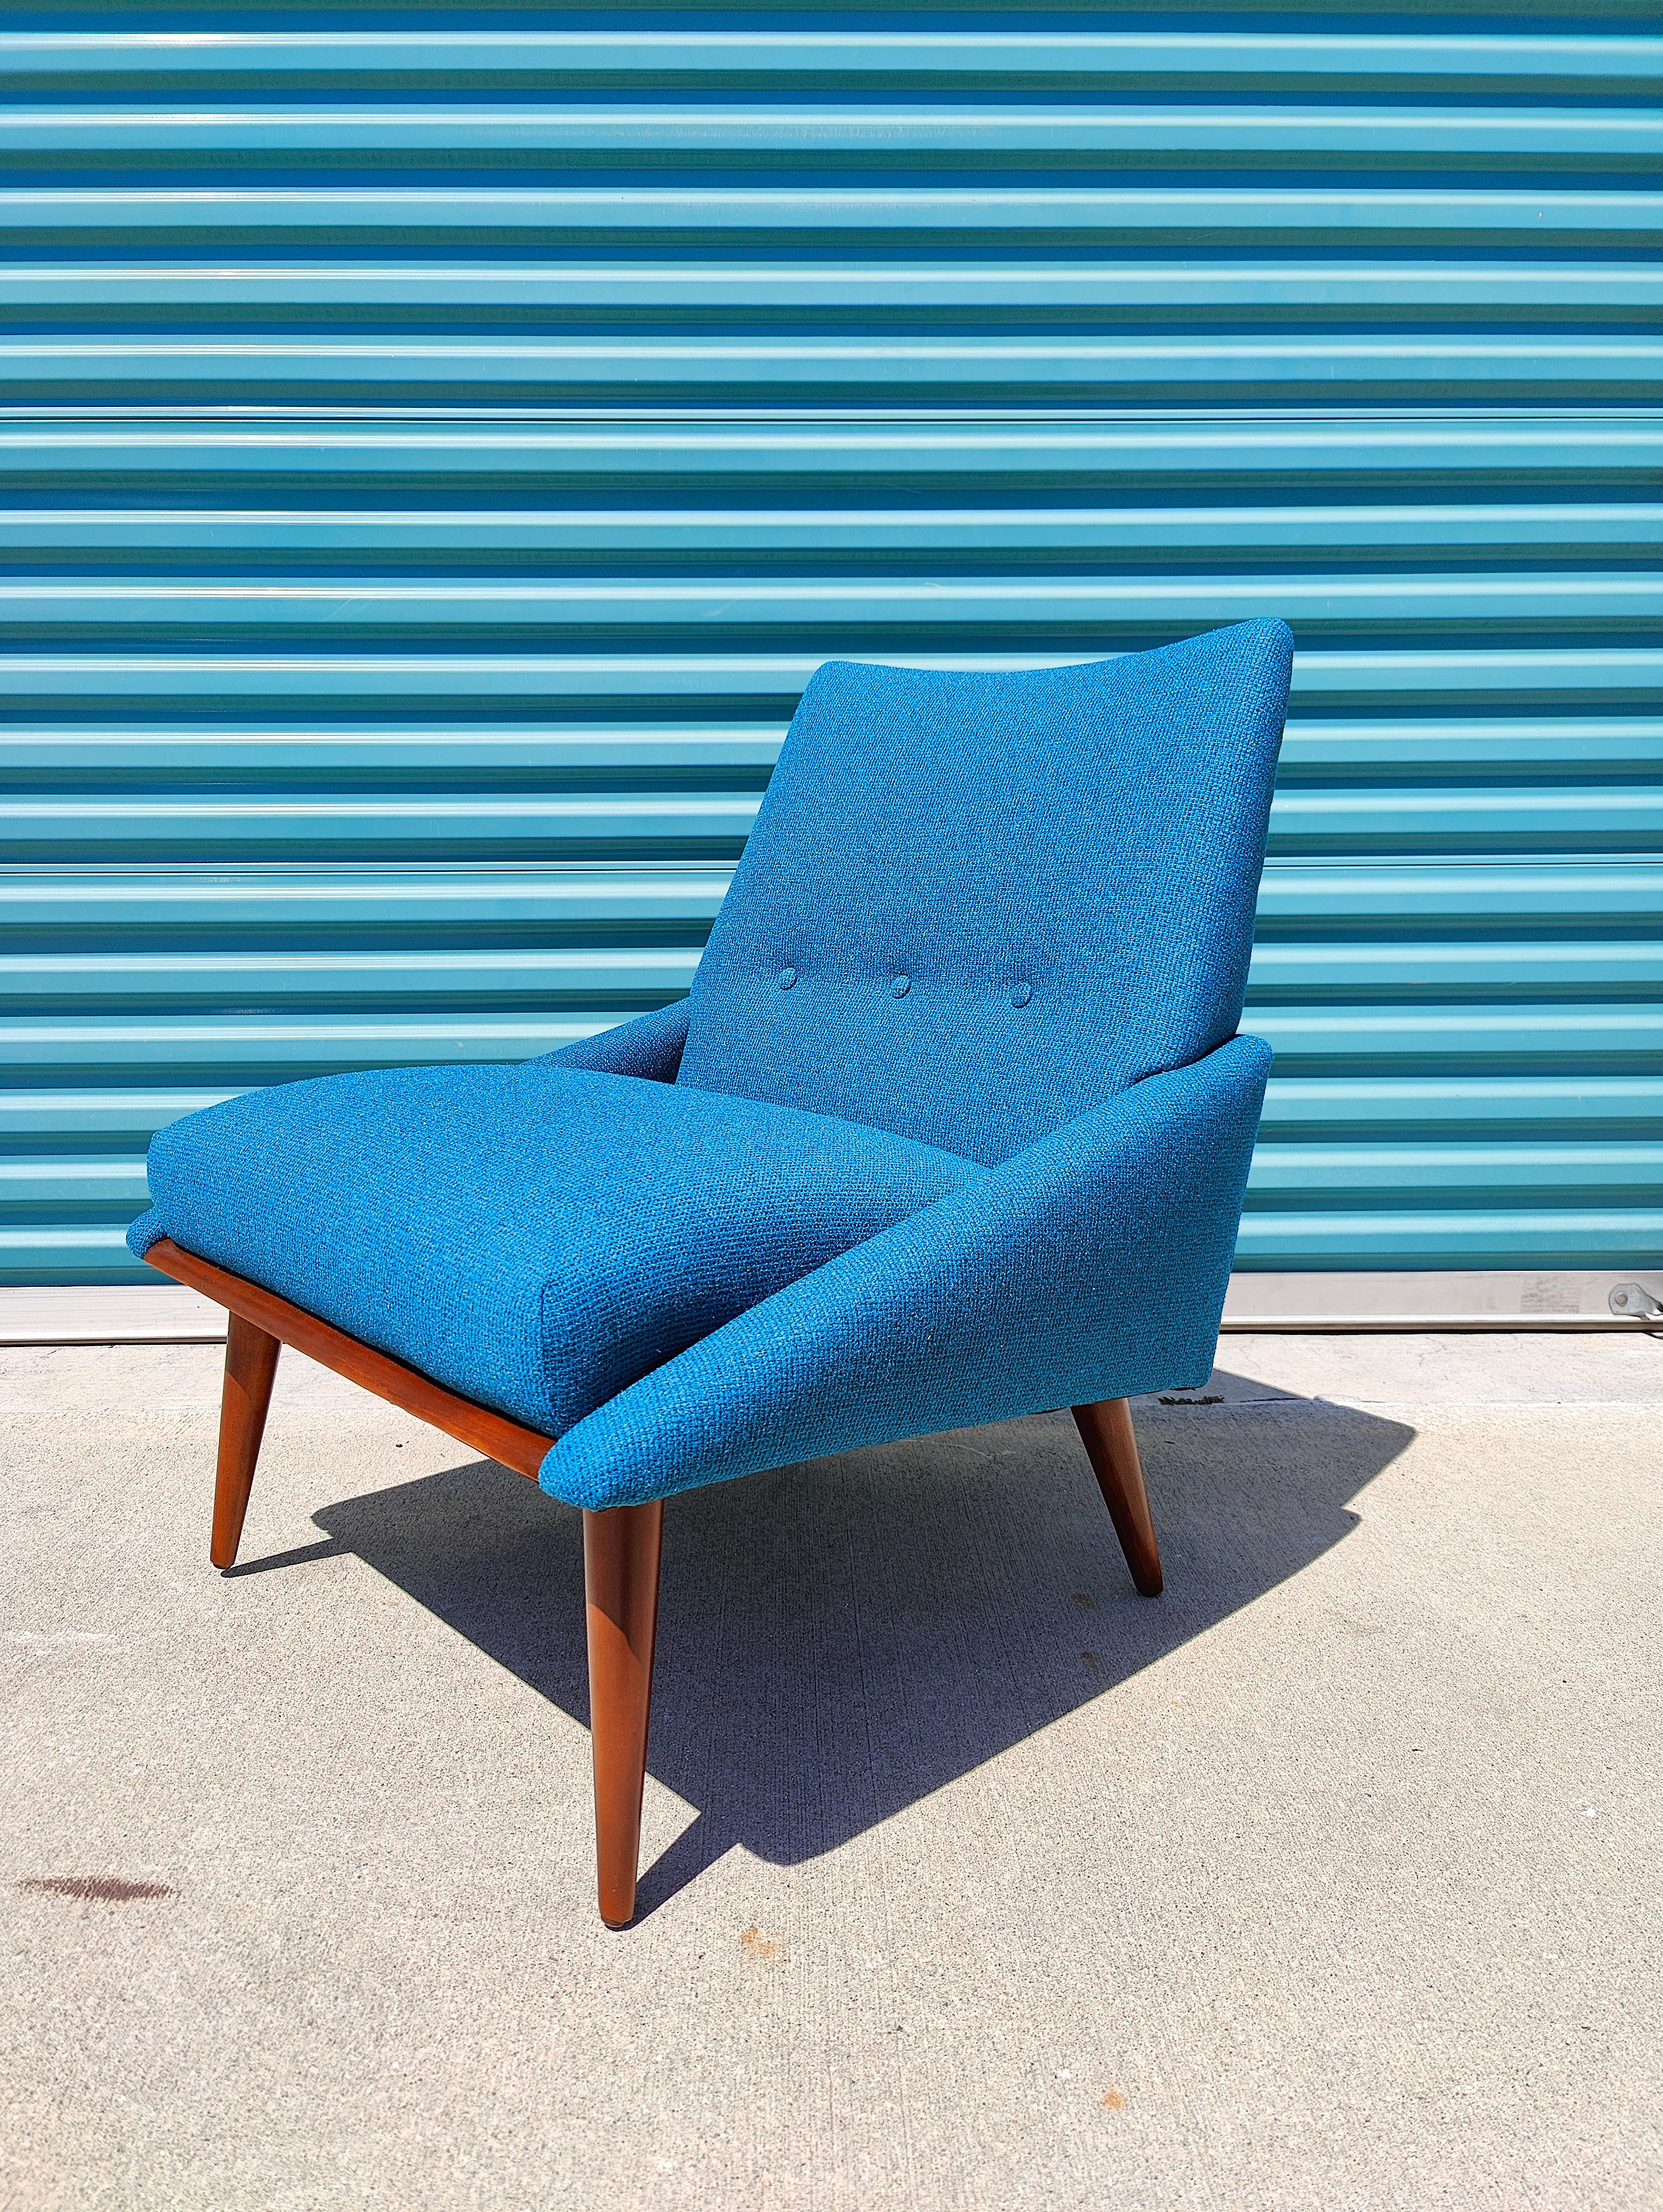 Recently refinished in electric blue fabric and overall in excellent condition. Features the classic walnut wood legs with clean simple lines. Measures approximately 25w x 23d x 31t with a seat height of 17 inches. Would look great in a mid century